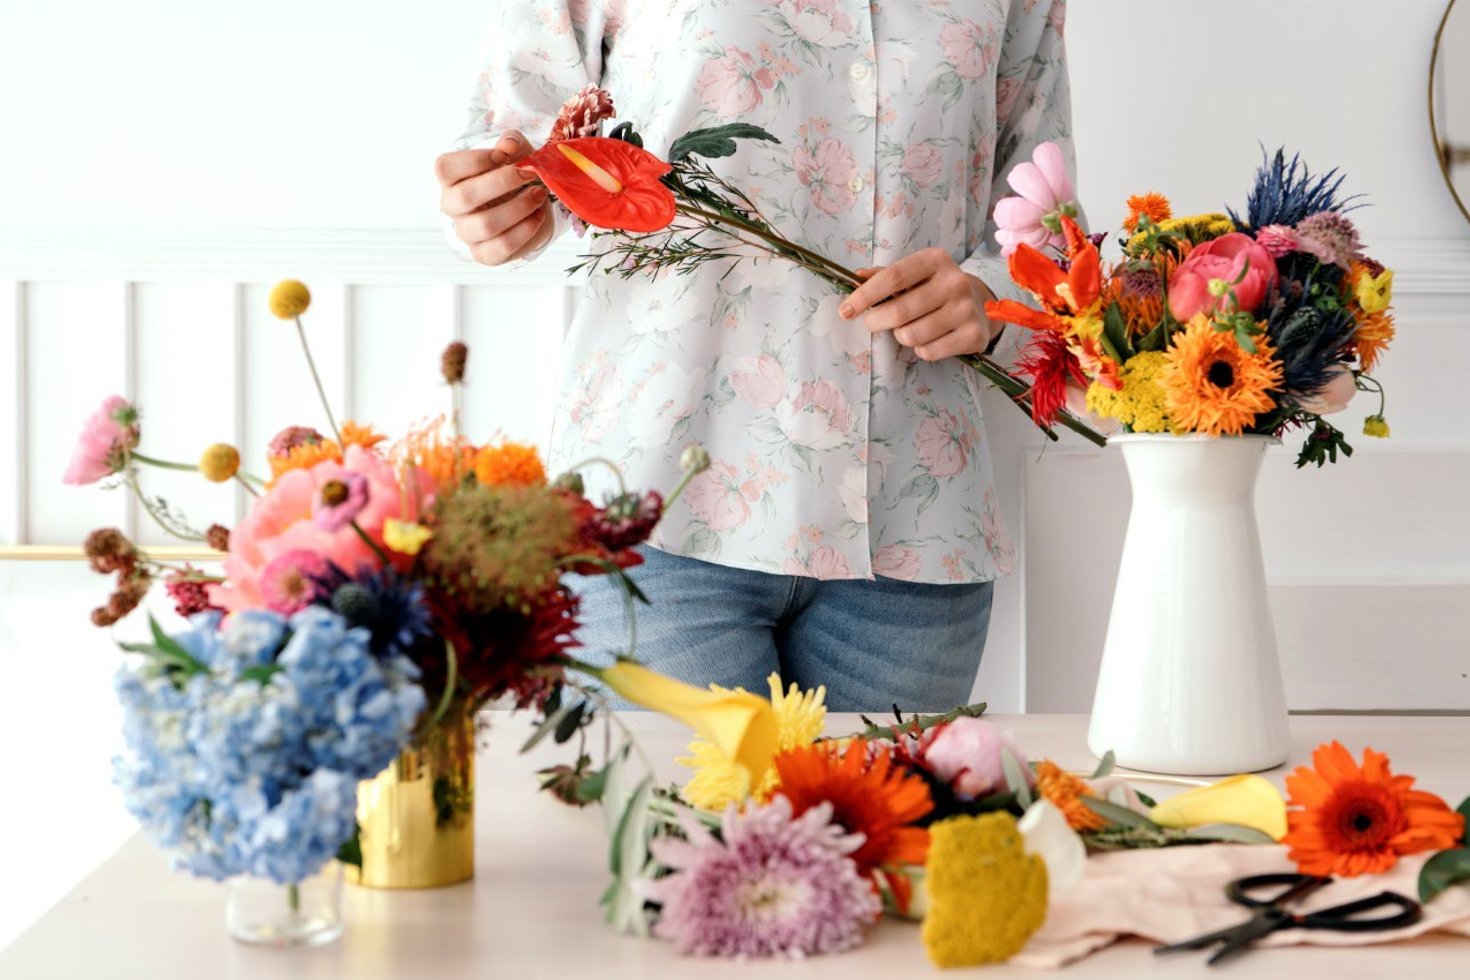 DIY Blooming Projects: Fresh Flower Craft Ideas To Try